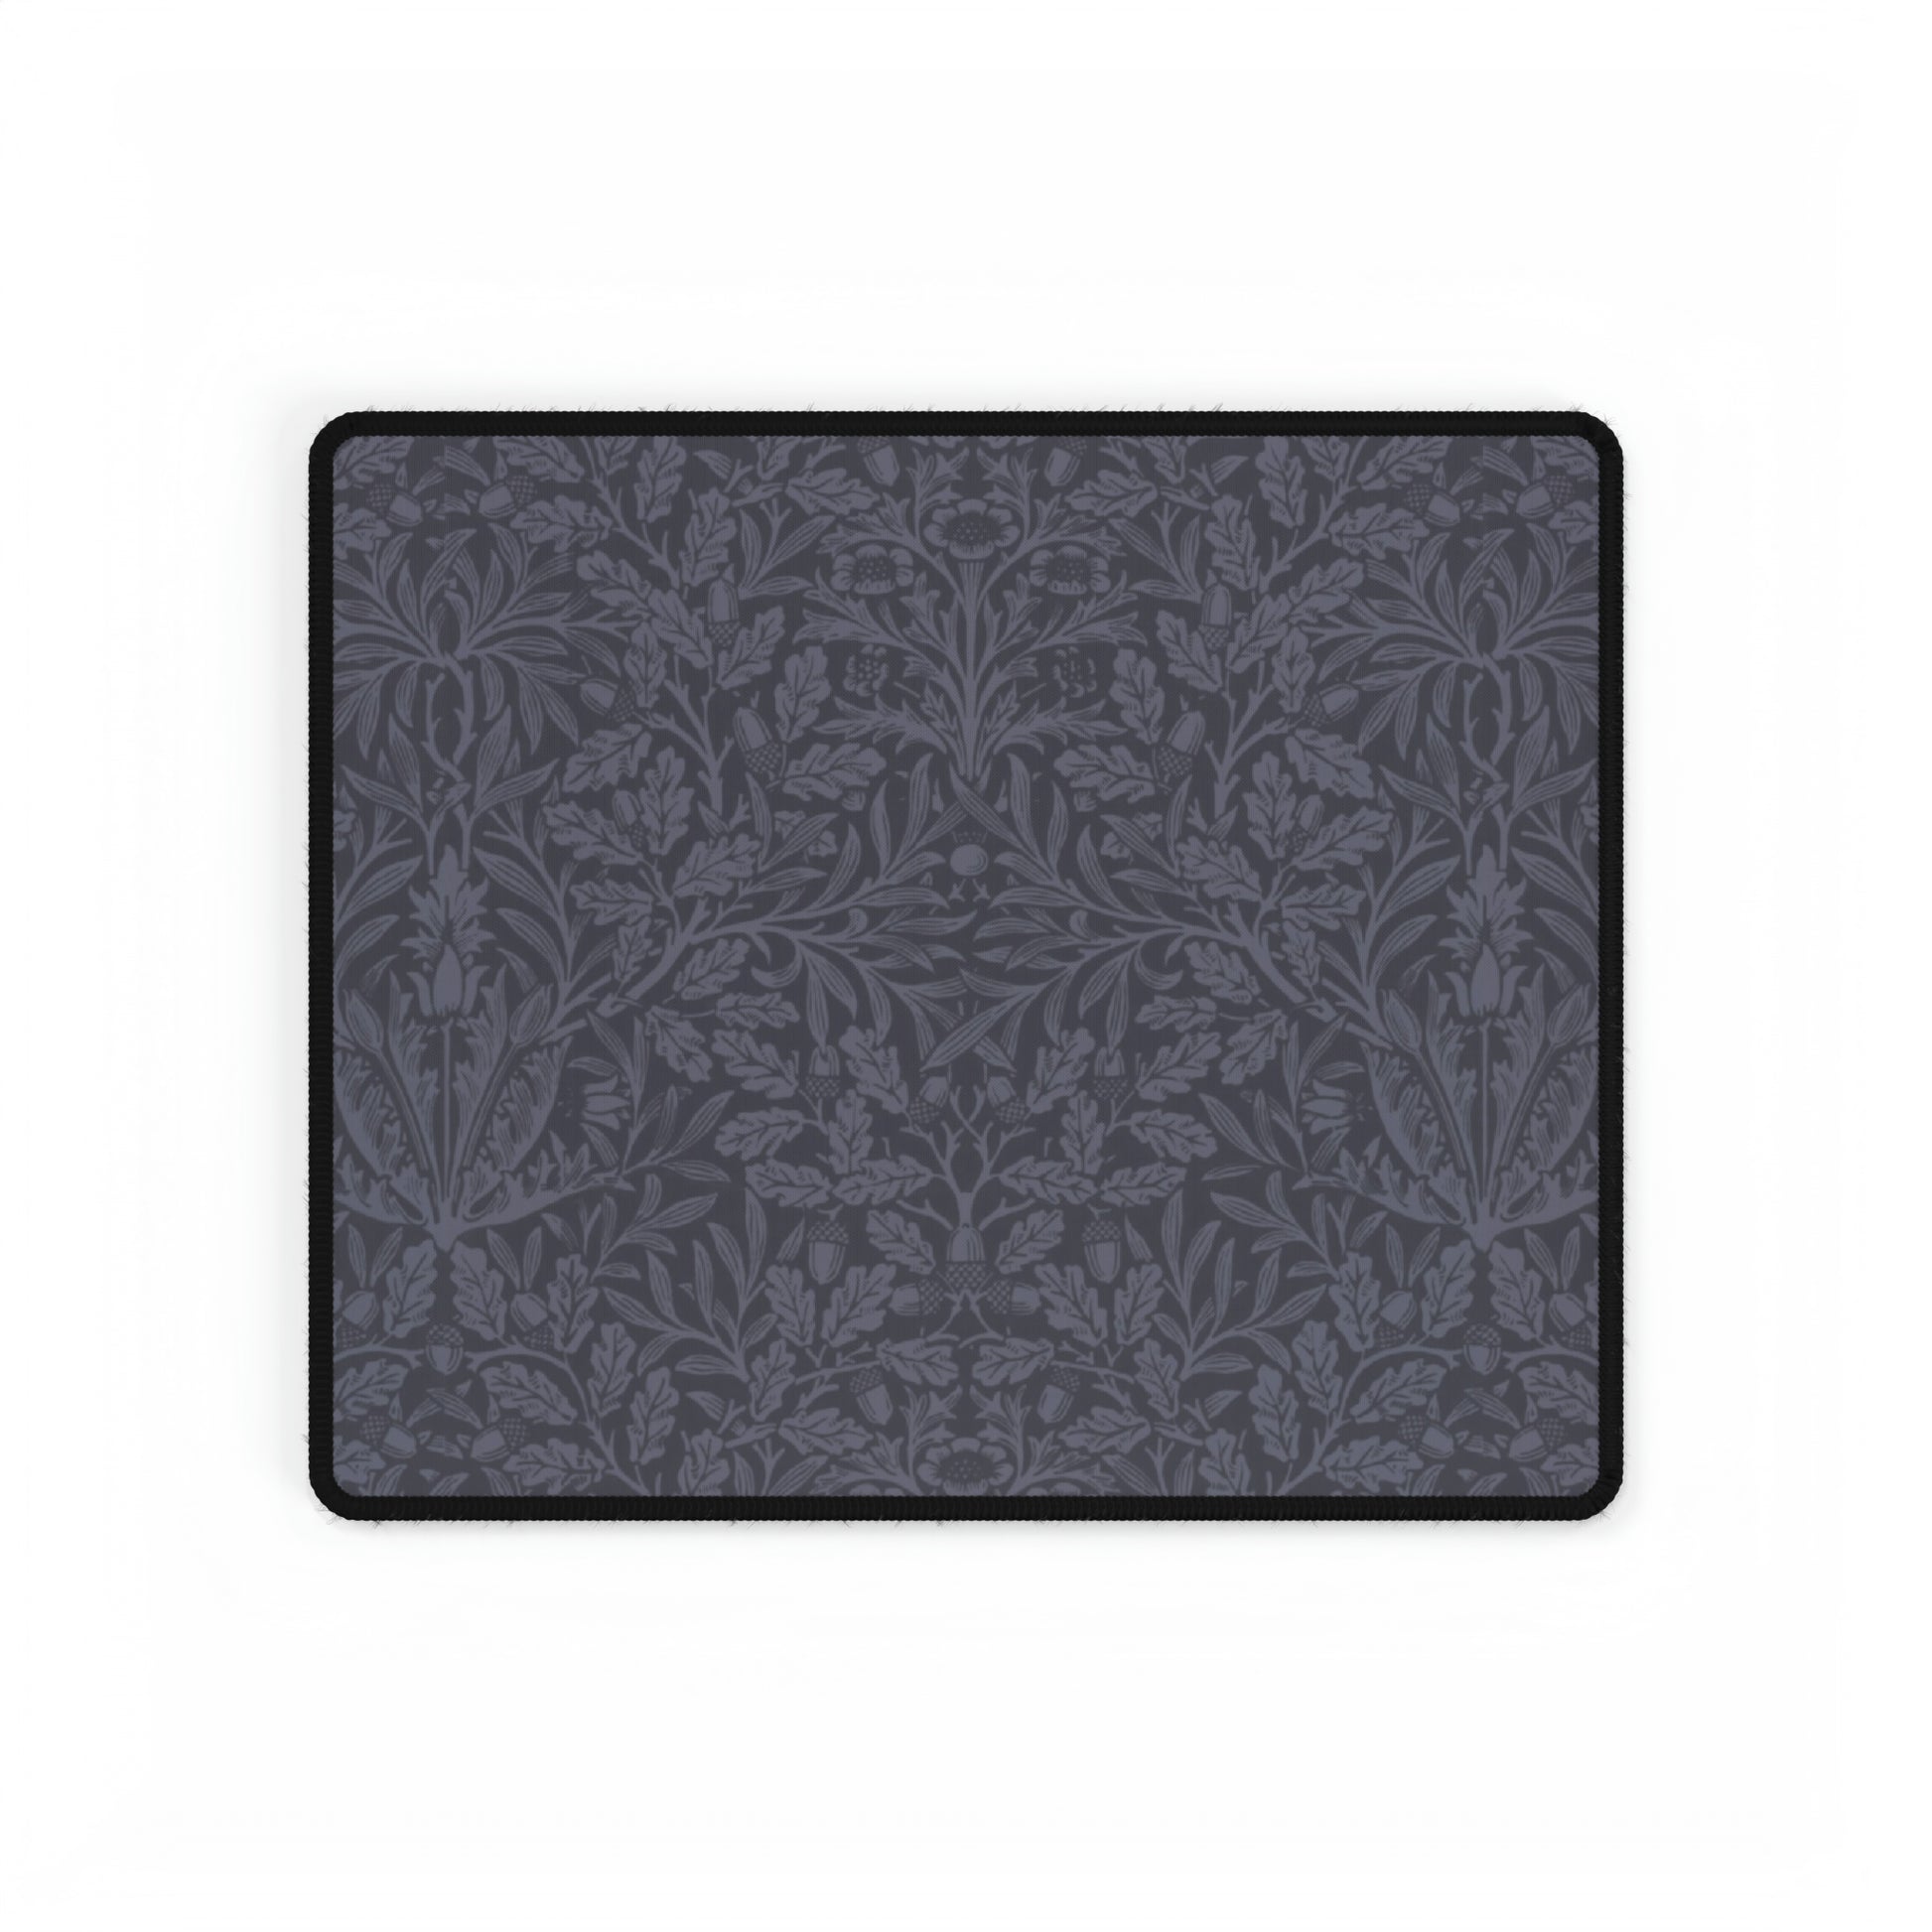 william-morris-co-desk-mats-acorns-and-oak-leaves-collection-smokey-blue-8